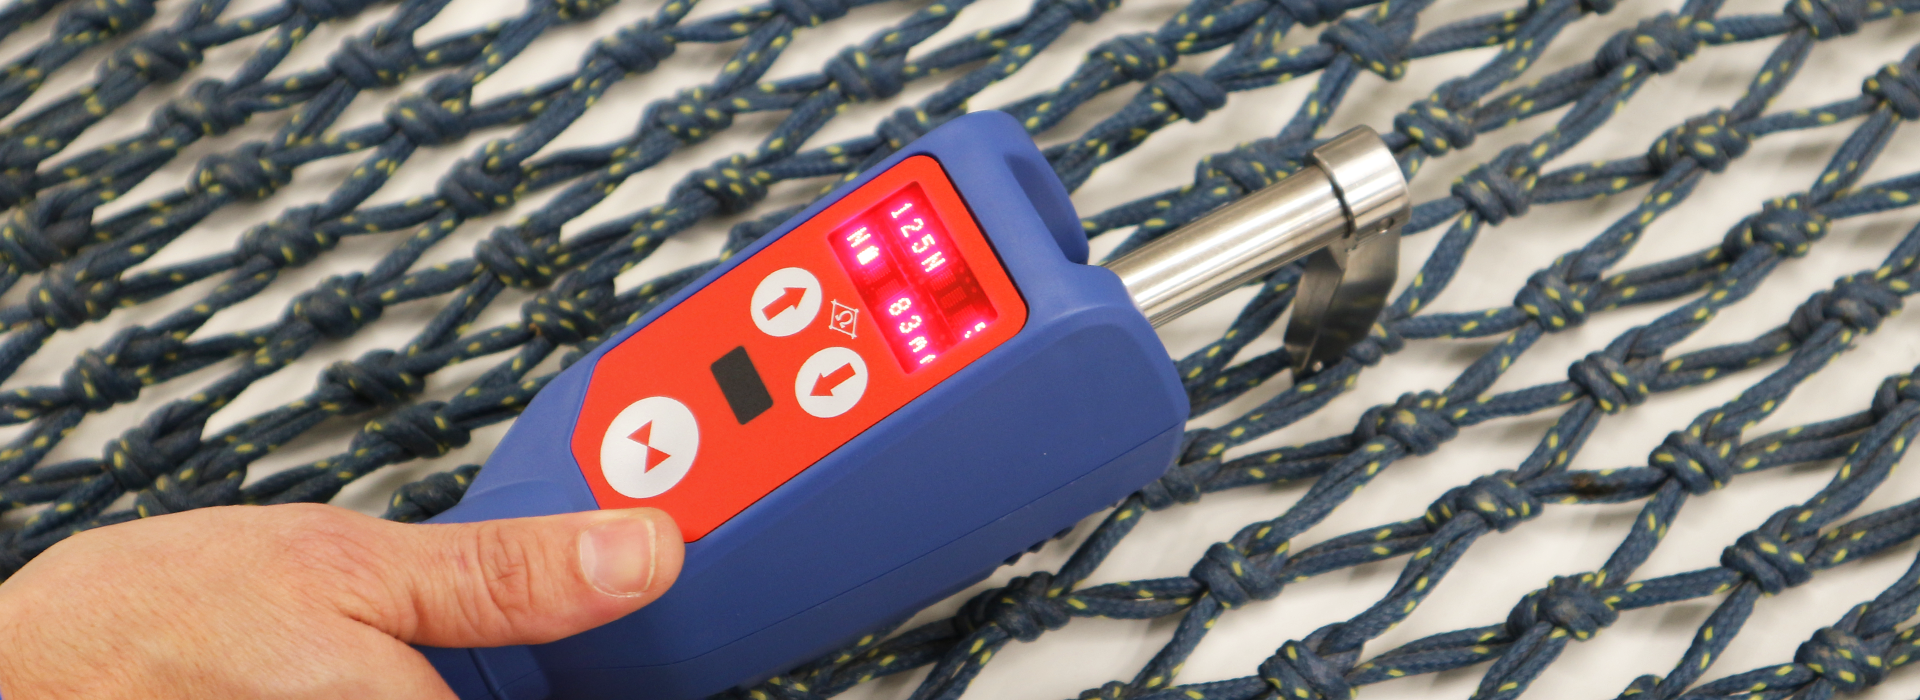 The OMEGA Mesh Gauge measures the exact sizes of the meshes of fishing nets.